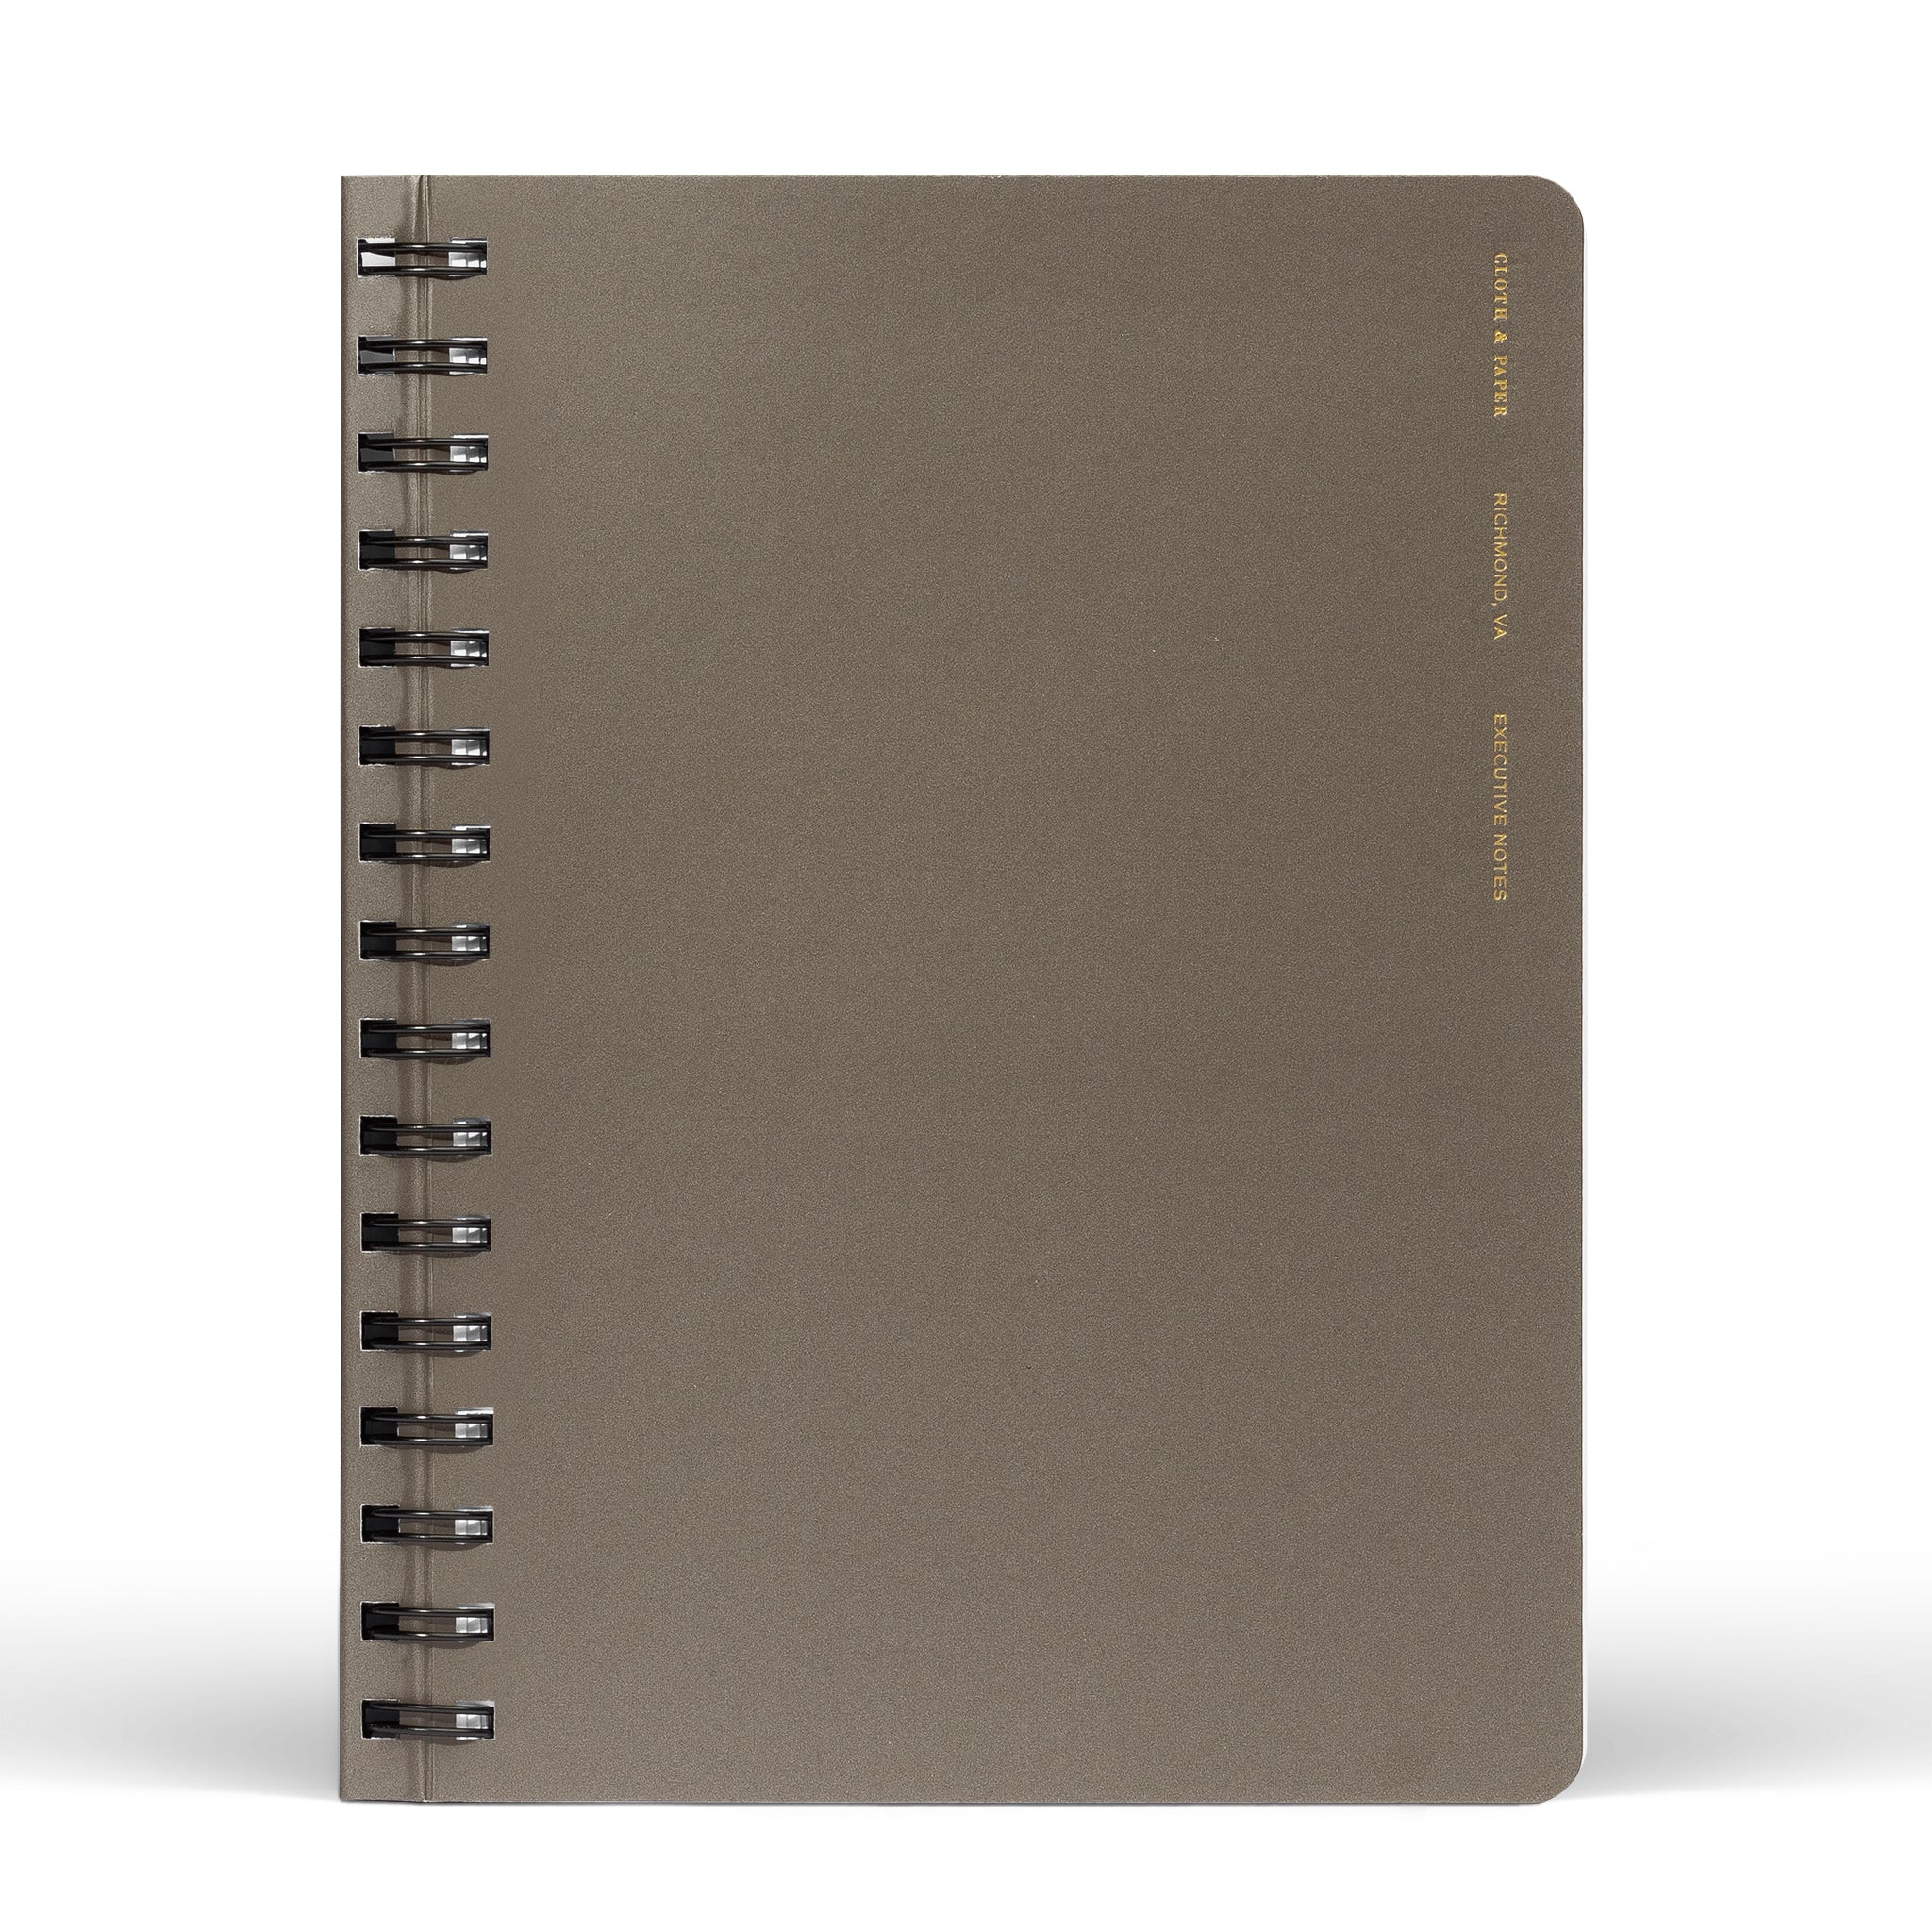 Sketch Books, Hard-Bound,<br>4 x 6 - 110 sheets (220 pages)